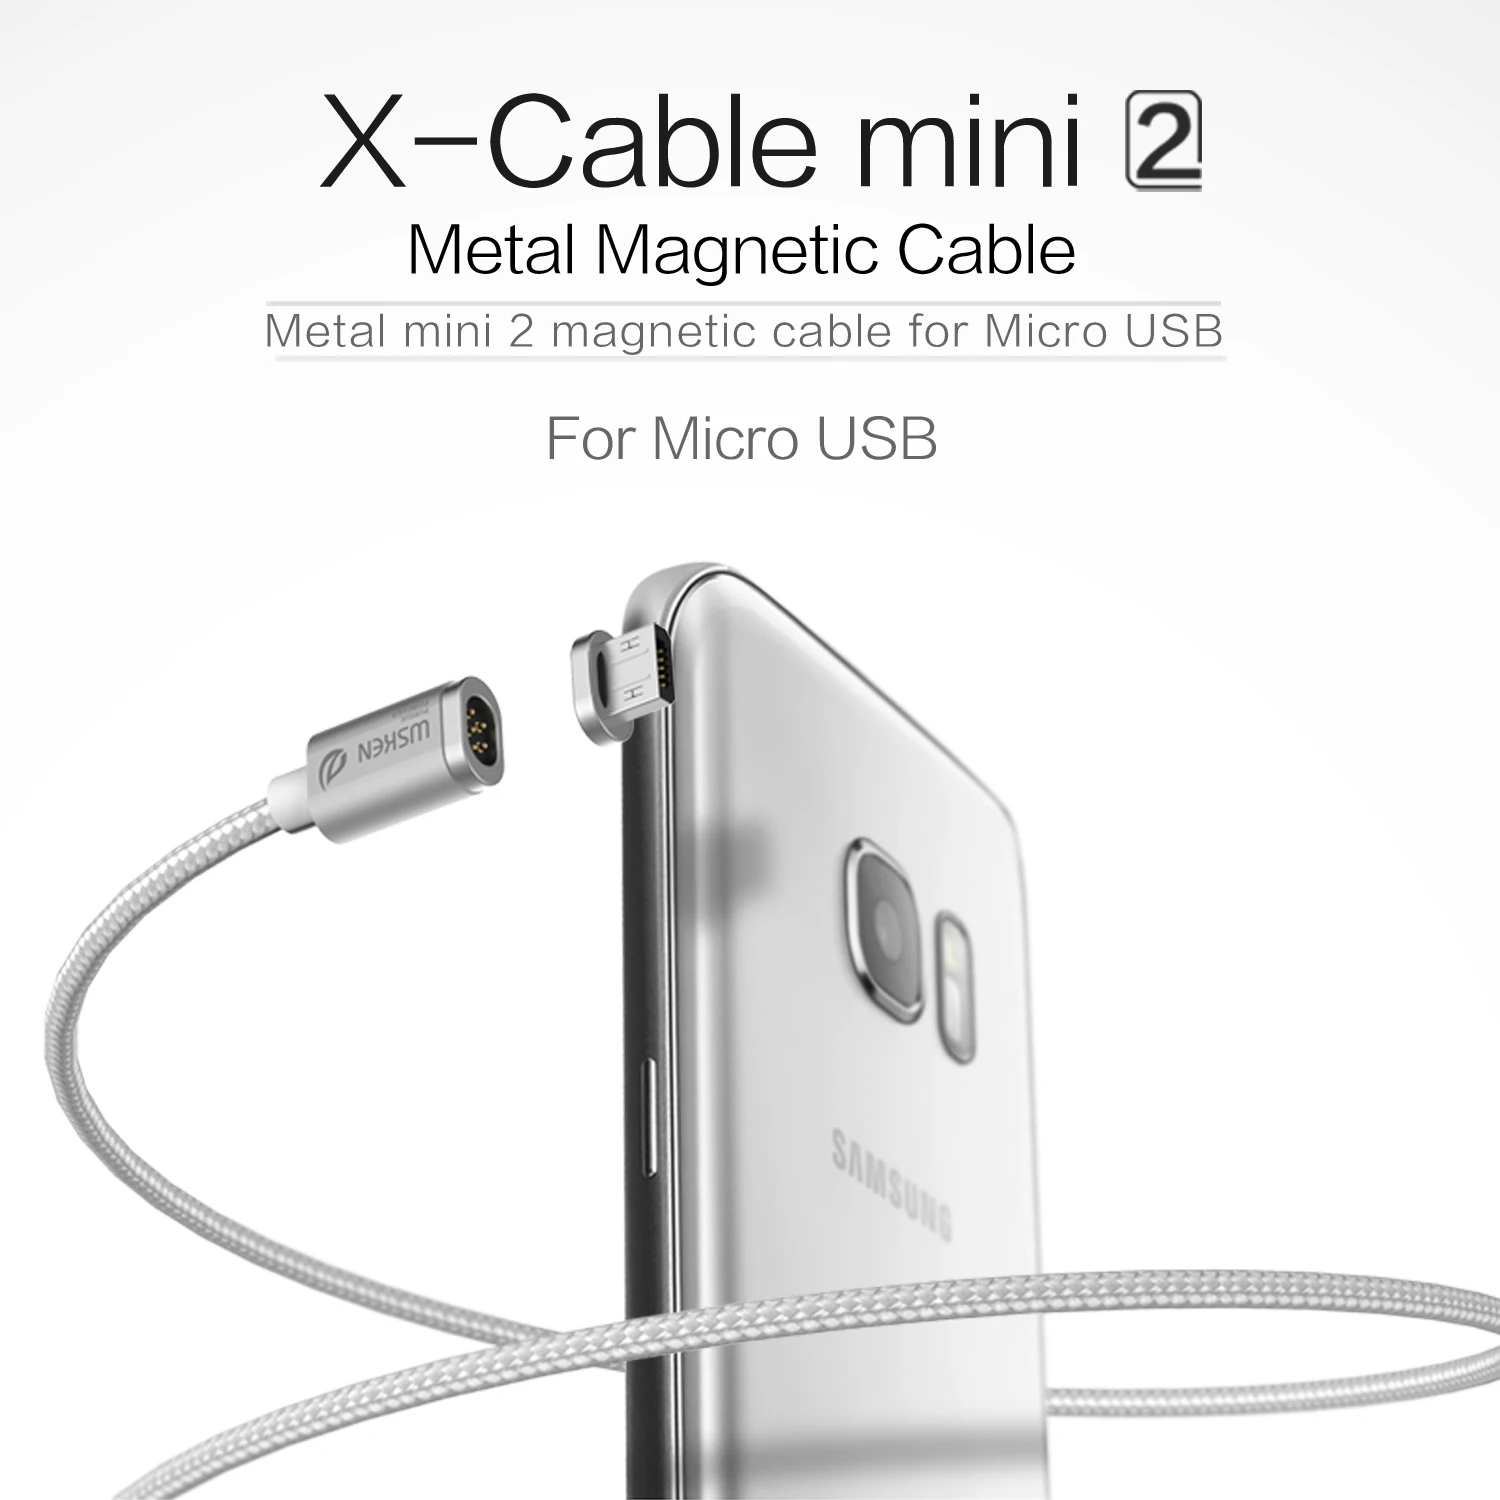 Xiaomi mibro z3. Магнитный кабель WSKEN X-Cable Mini. WSKEN Mini 2 Magnetic Charger Cable 3 in 1 for iphone Type c. Кабель магнитный Metal Magnetic Micro USB Silver. Магнитный USB кабель WSKEN.